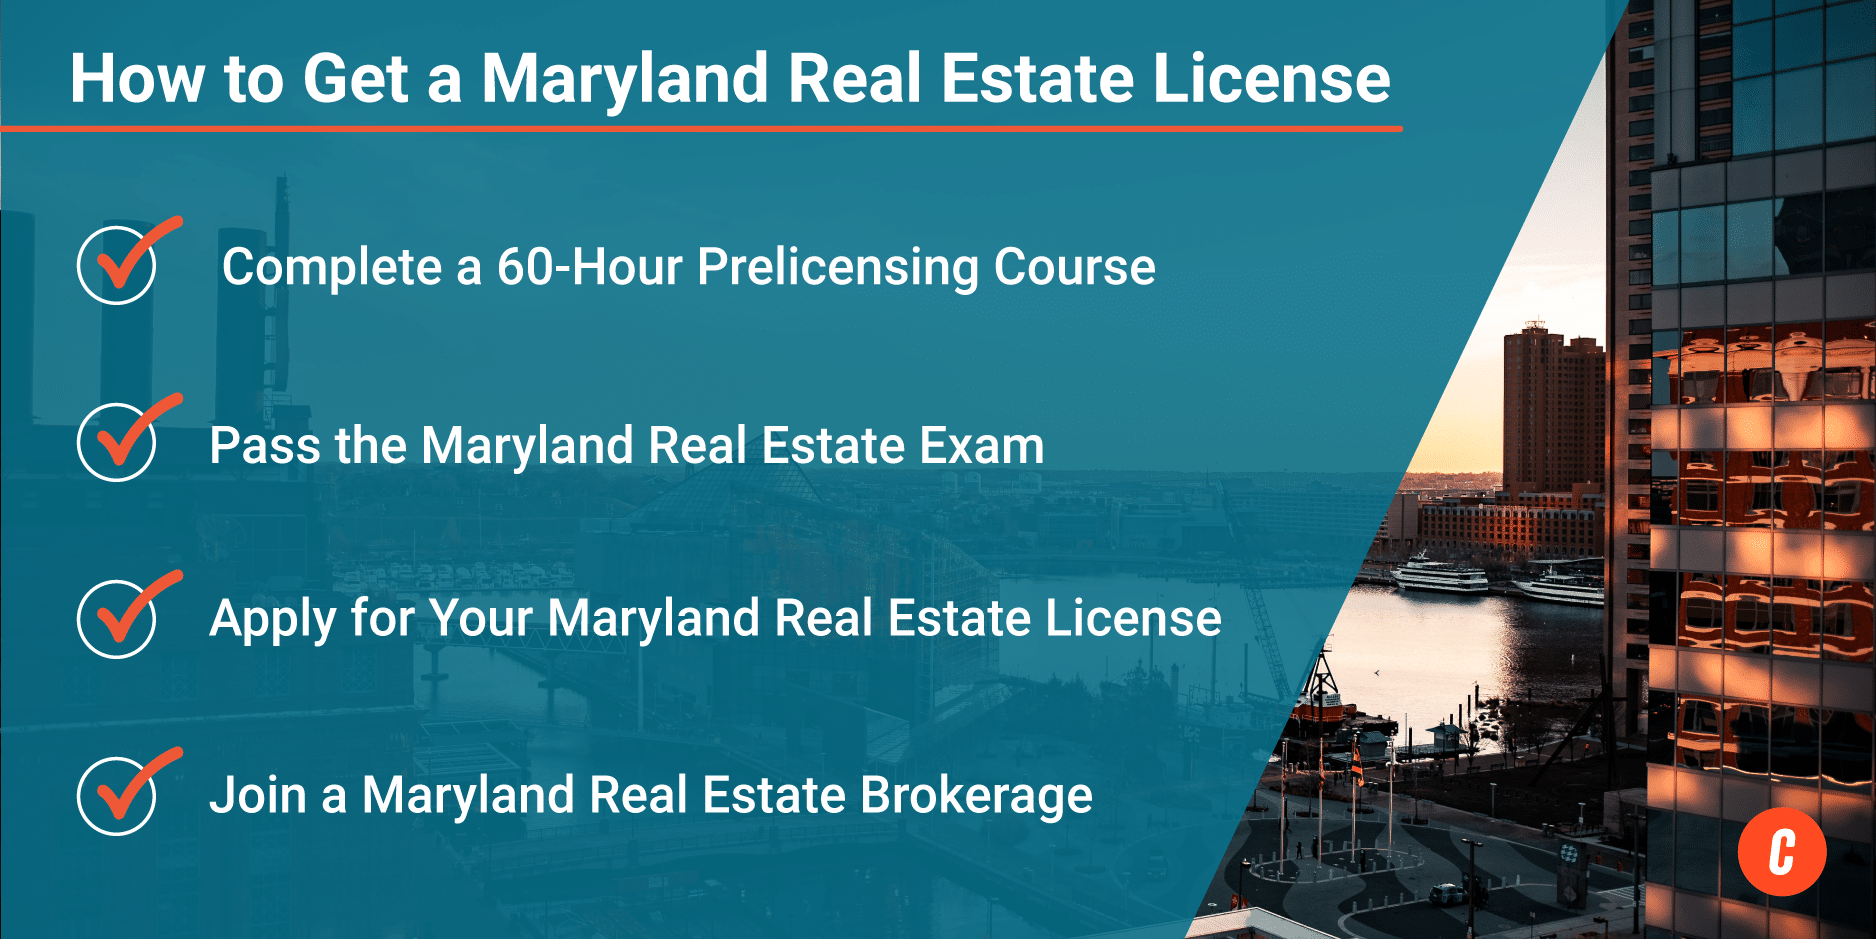 How to Get a Maryland Real Estate License in 4 Easy Steps